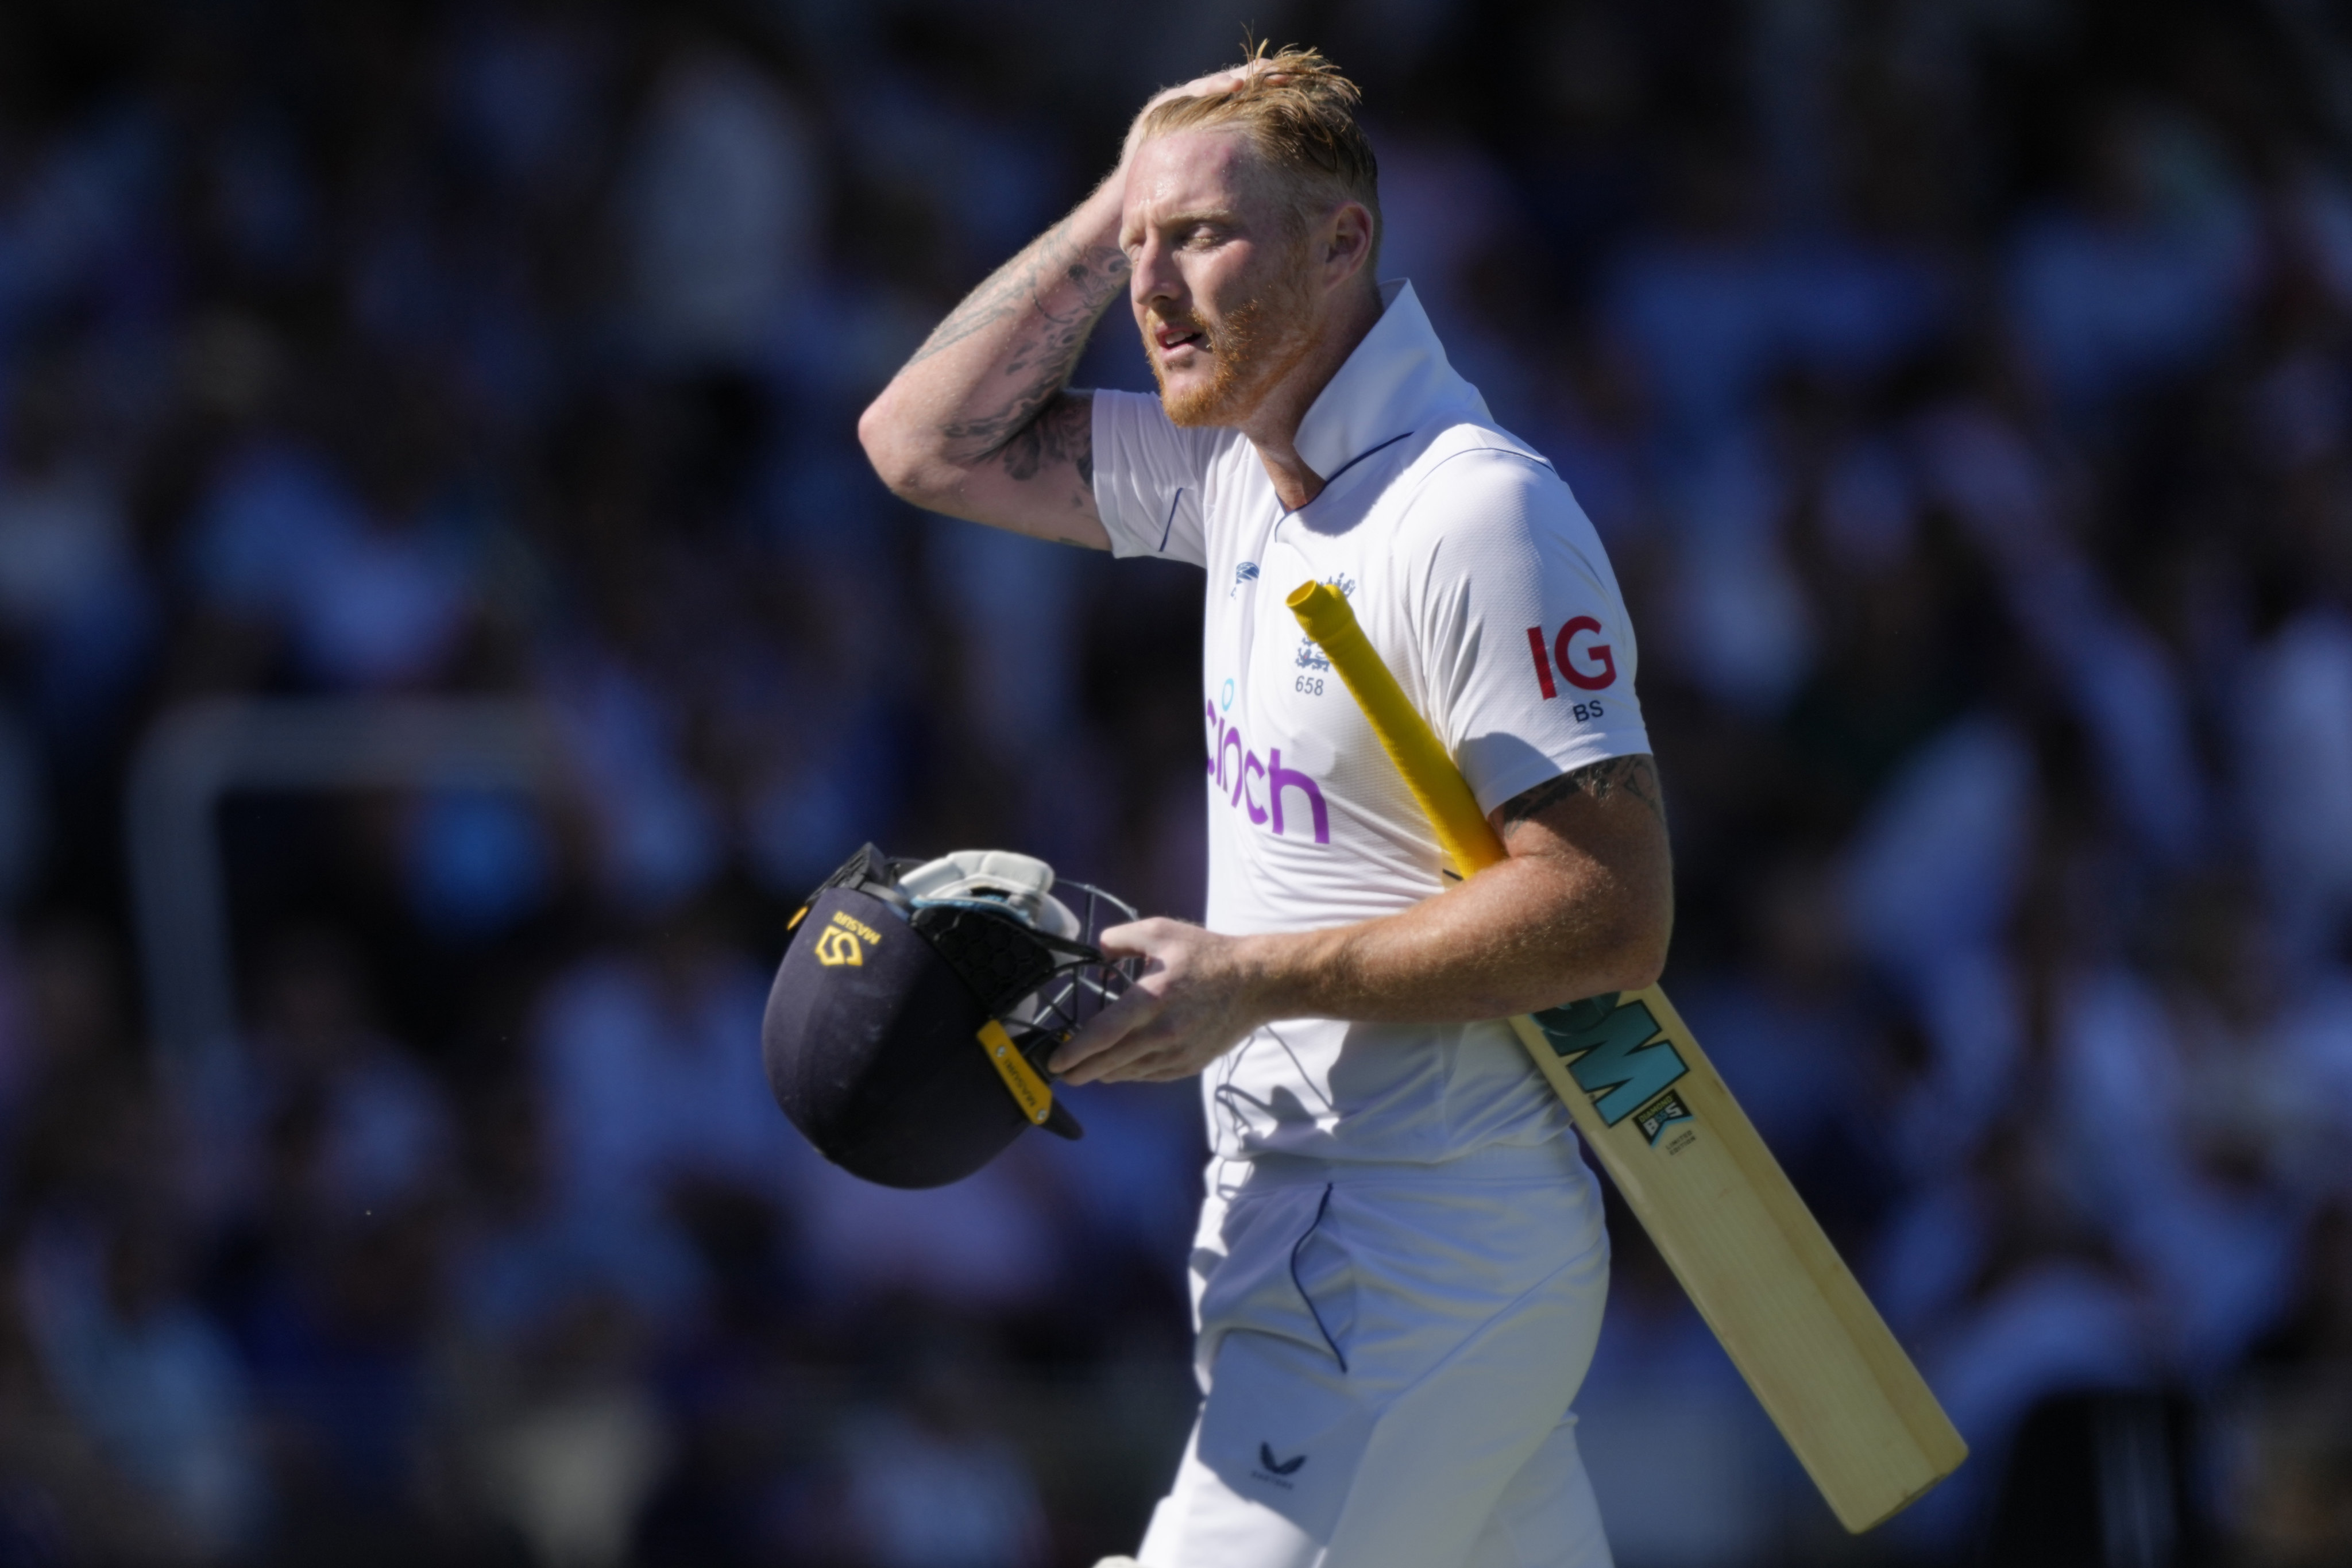 England captain Ben Stokes returns to the dressing room on Friday after his dismissal during the test match with South Africa at Lord’s. Photo: AP